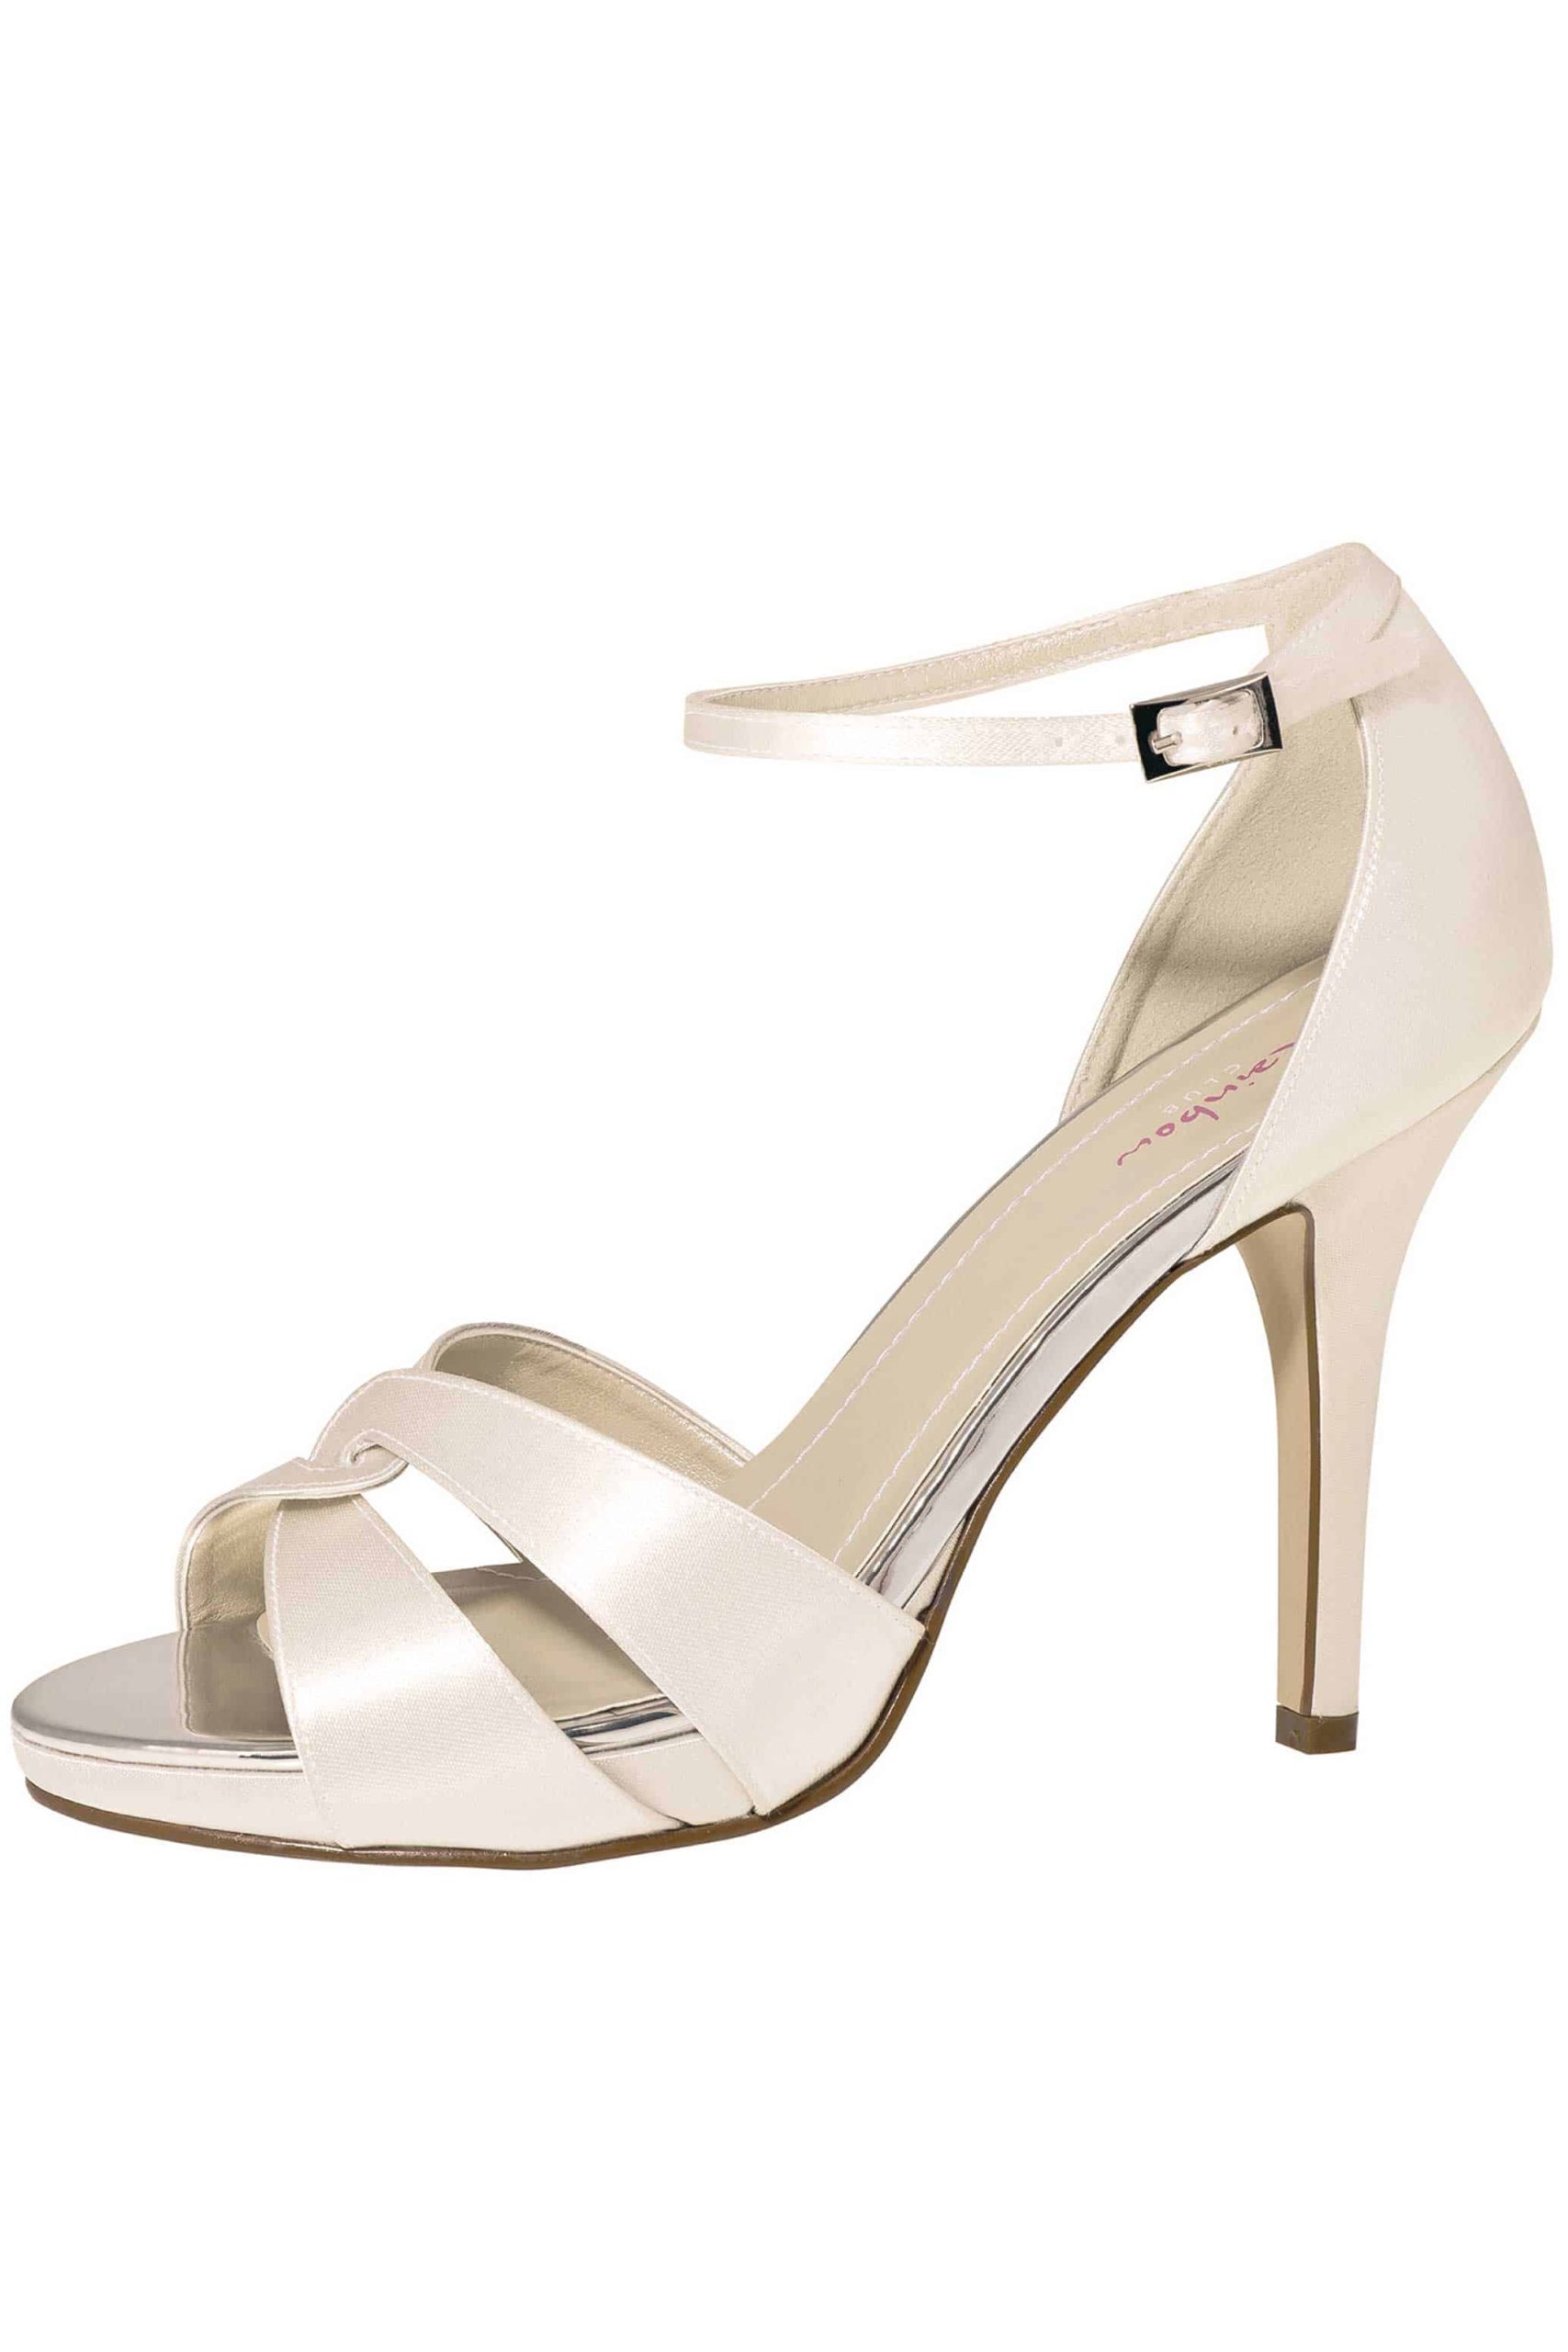 Featured image for “Accessoires Rainbow Club | Brautschuhe Cate Ivory”